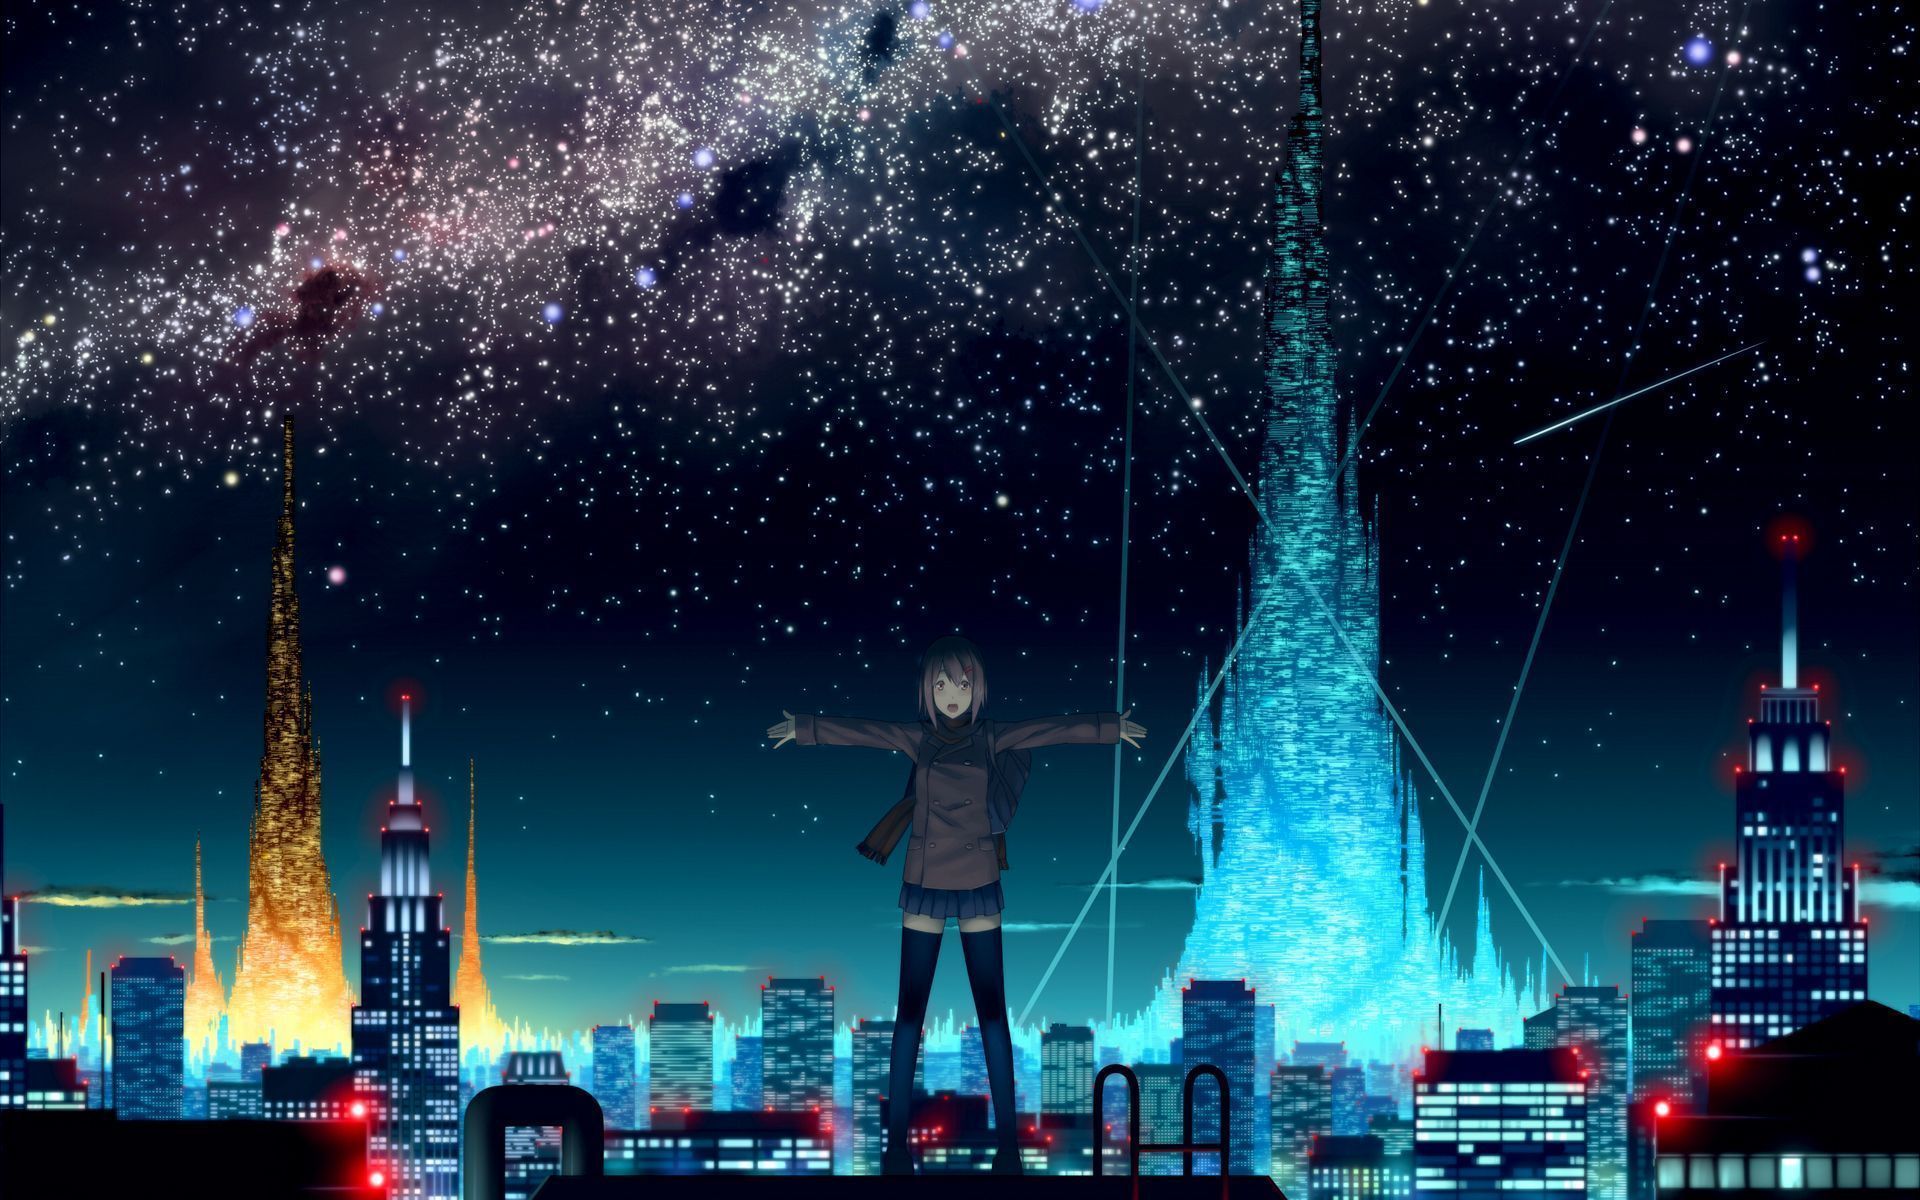 A girl stands on a roof with her arms outstretched, looking out over a city at night. - 1920x1200